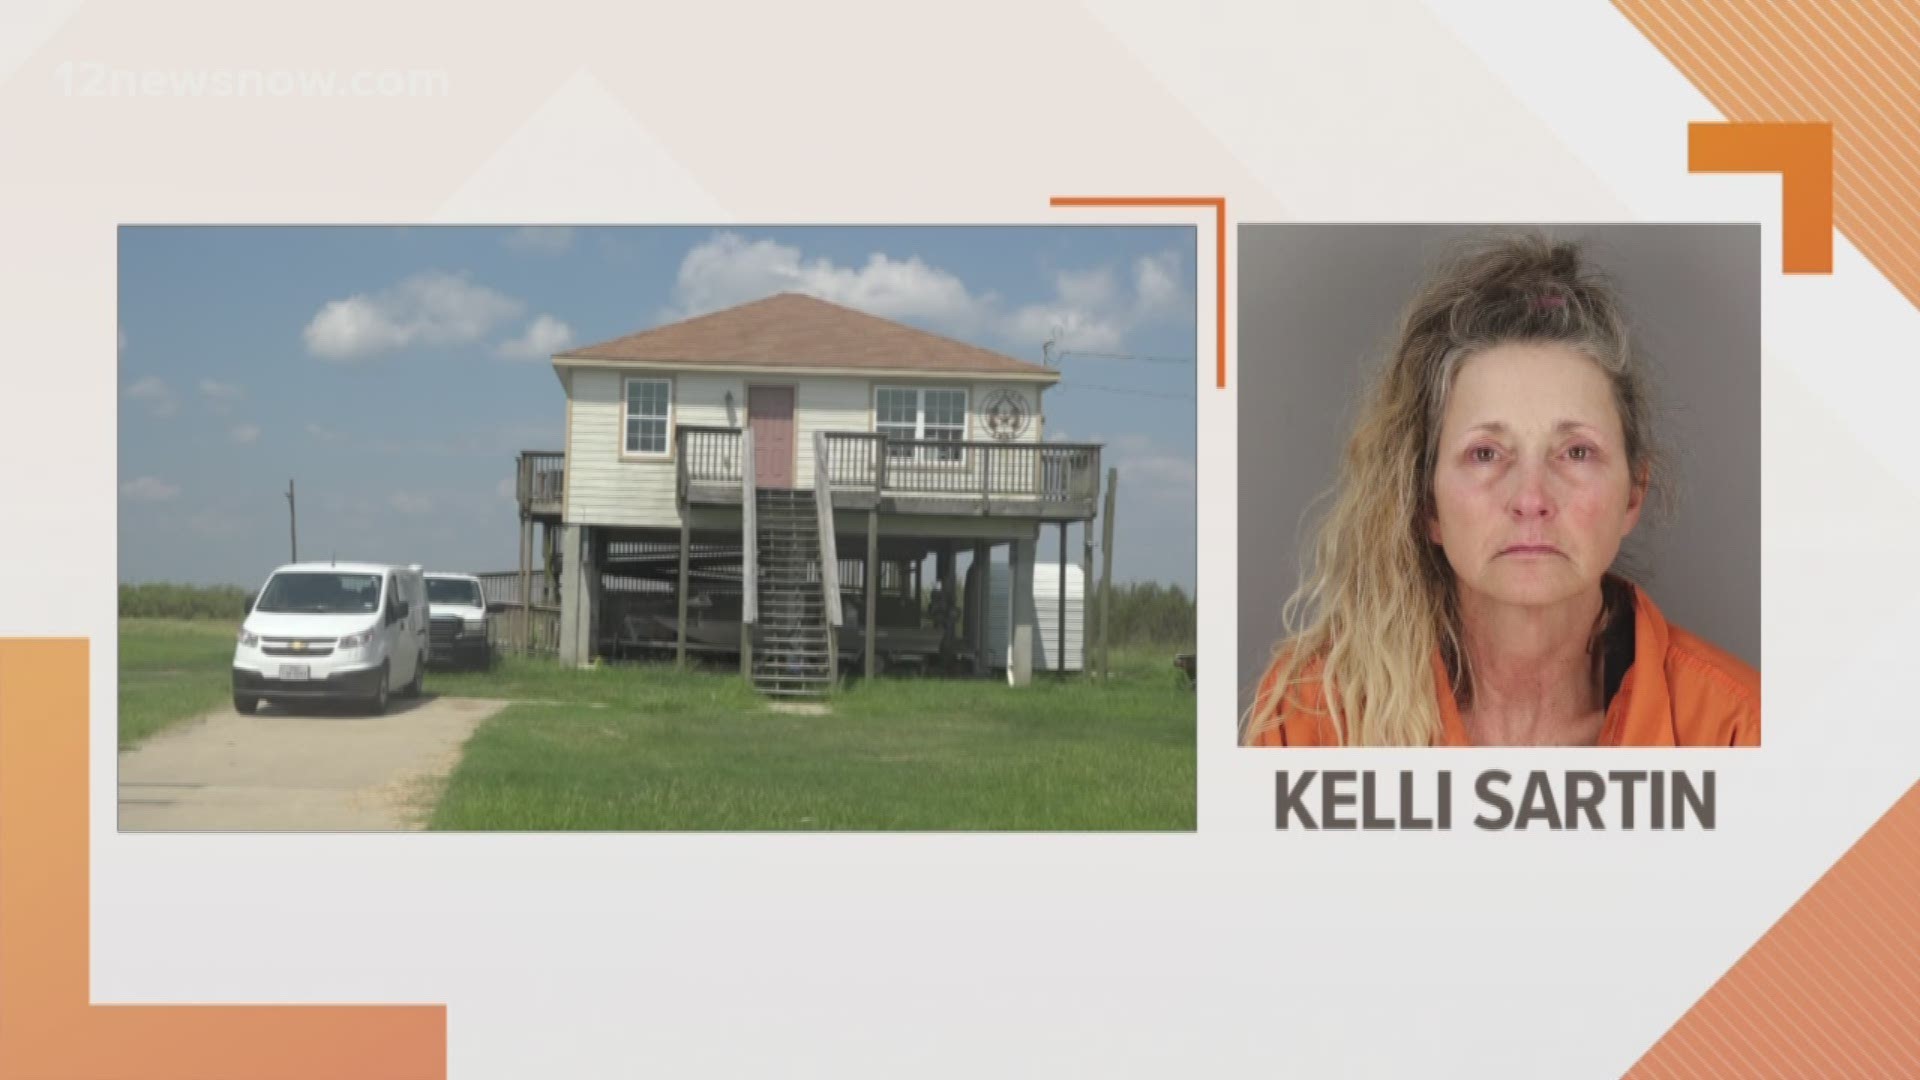 A woman accused of murdering her father in Sabine Pass is set to make a plea next week.
Kelli Sartin is facing murder charges in connection with her father's death.